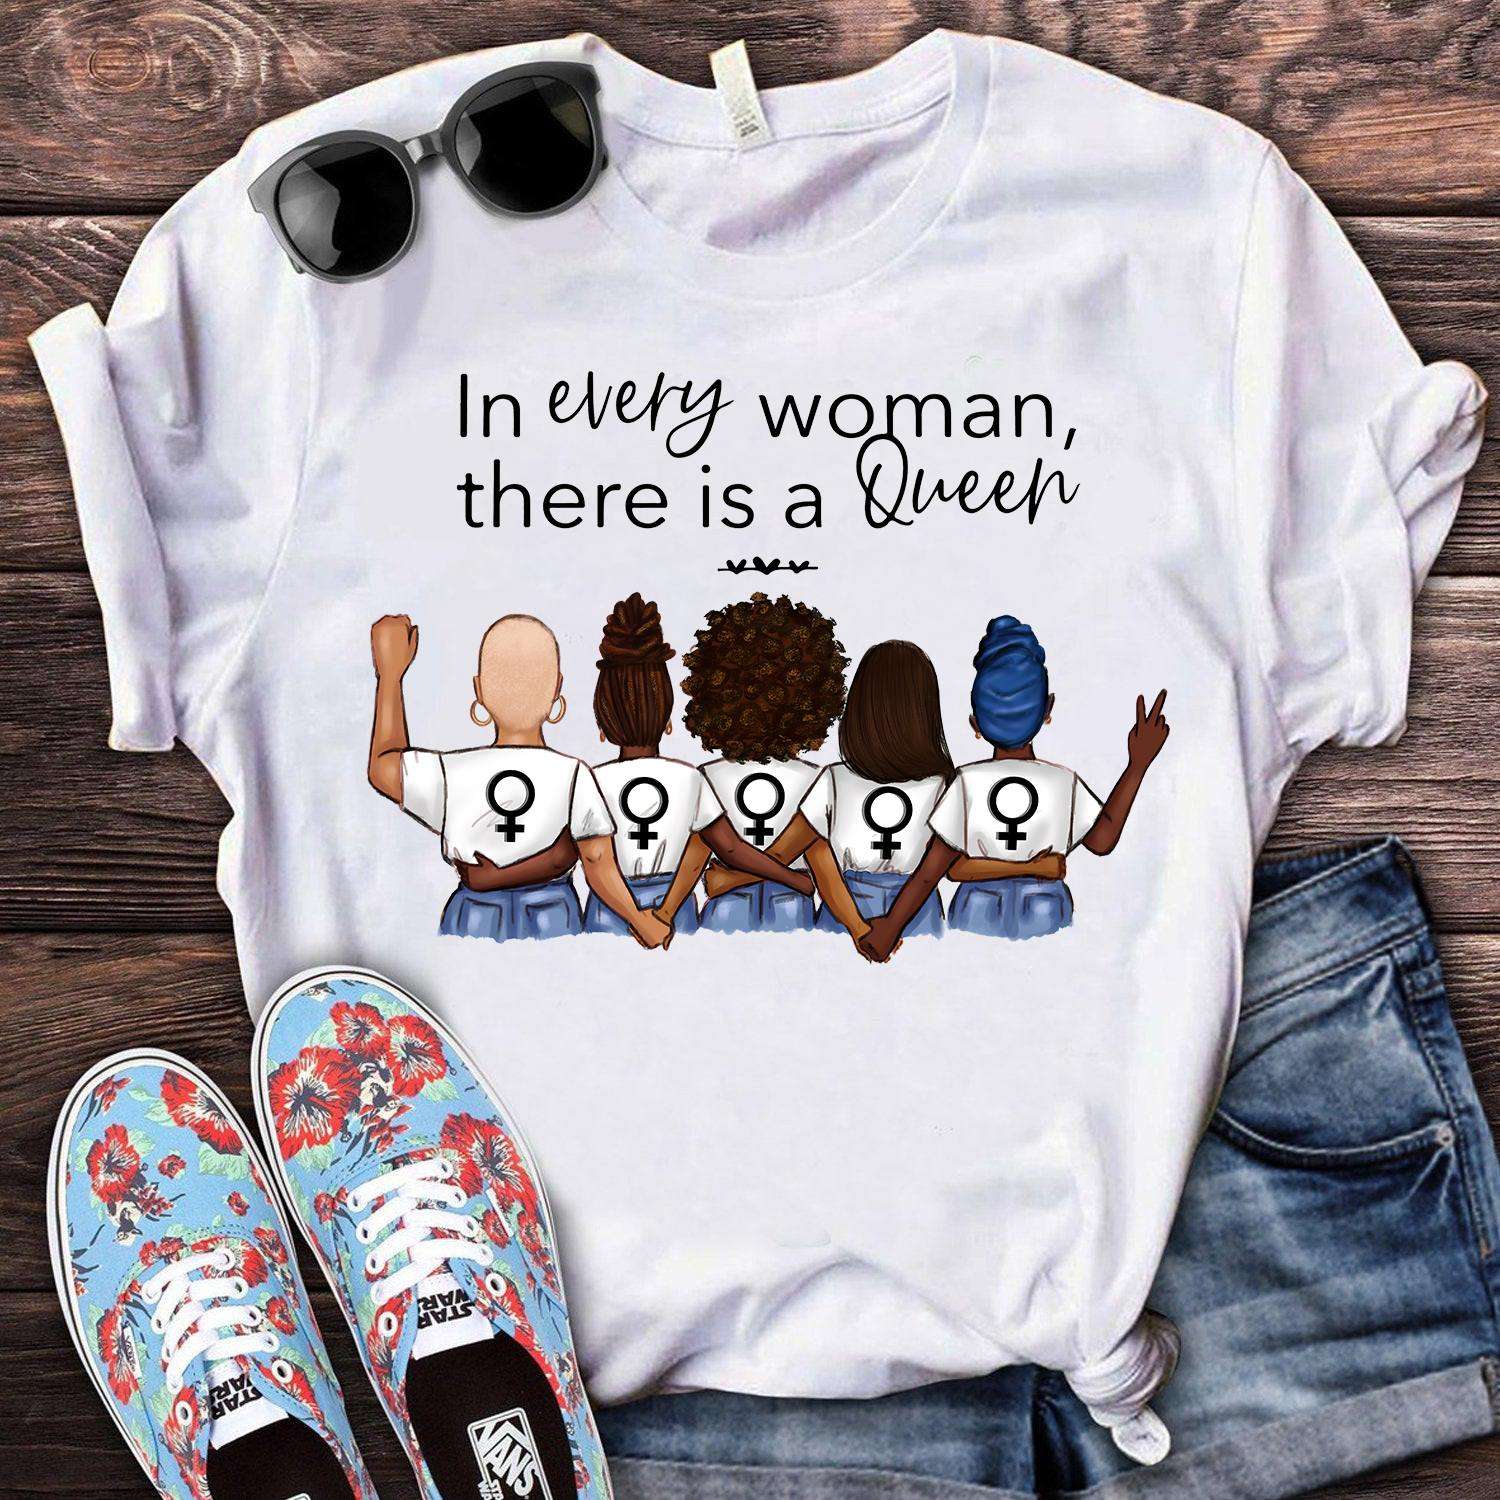 In every woman, there is a queen - black community, black queen graphic T-shirt